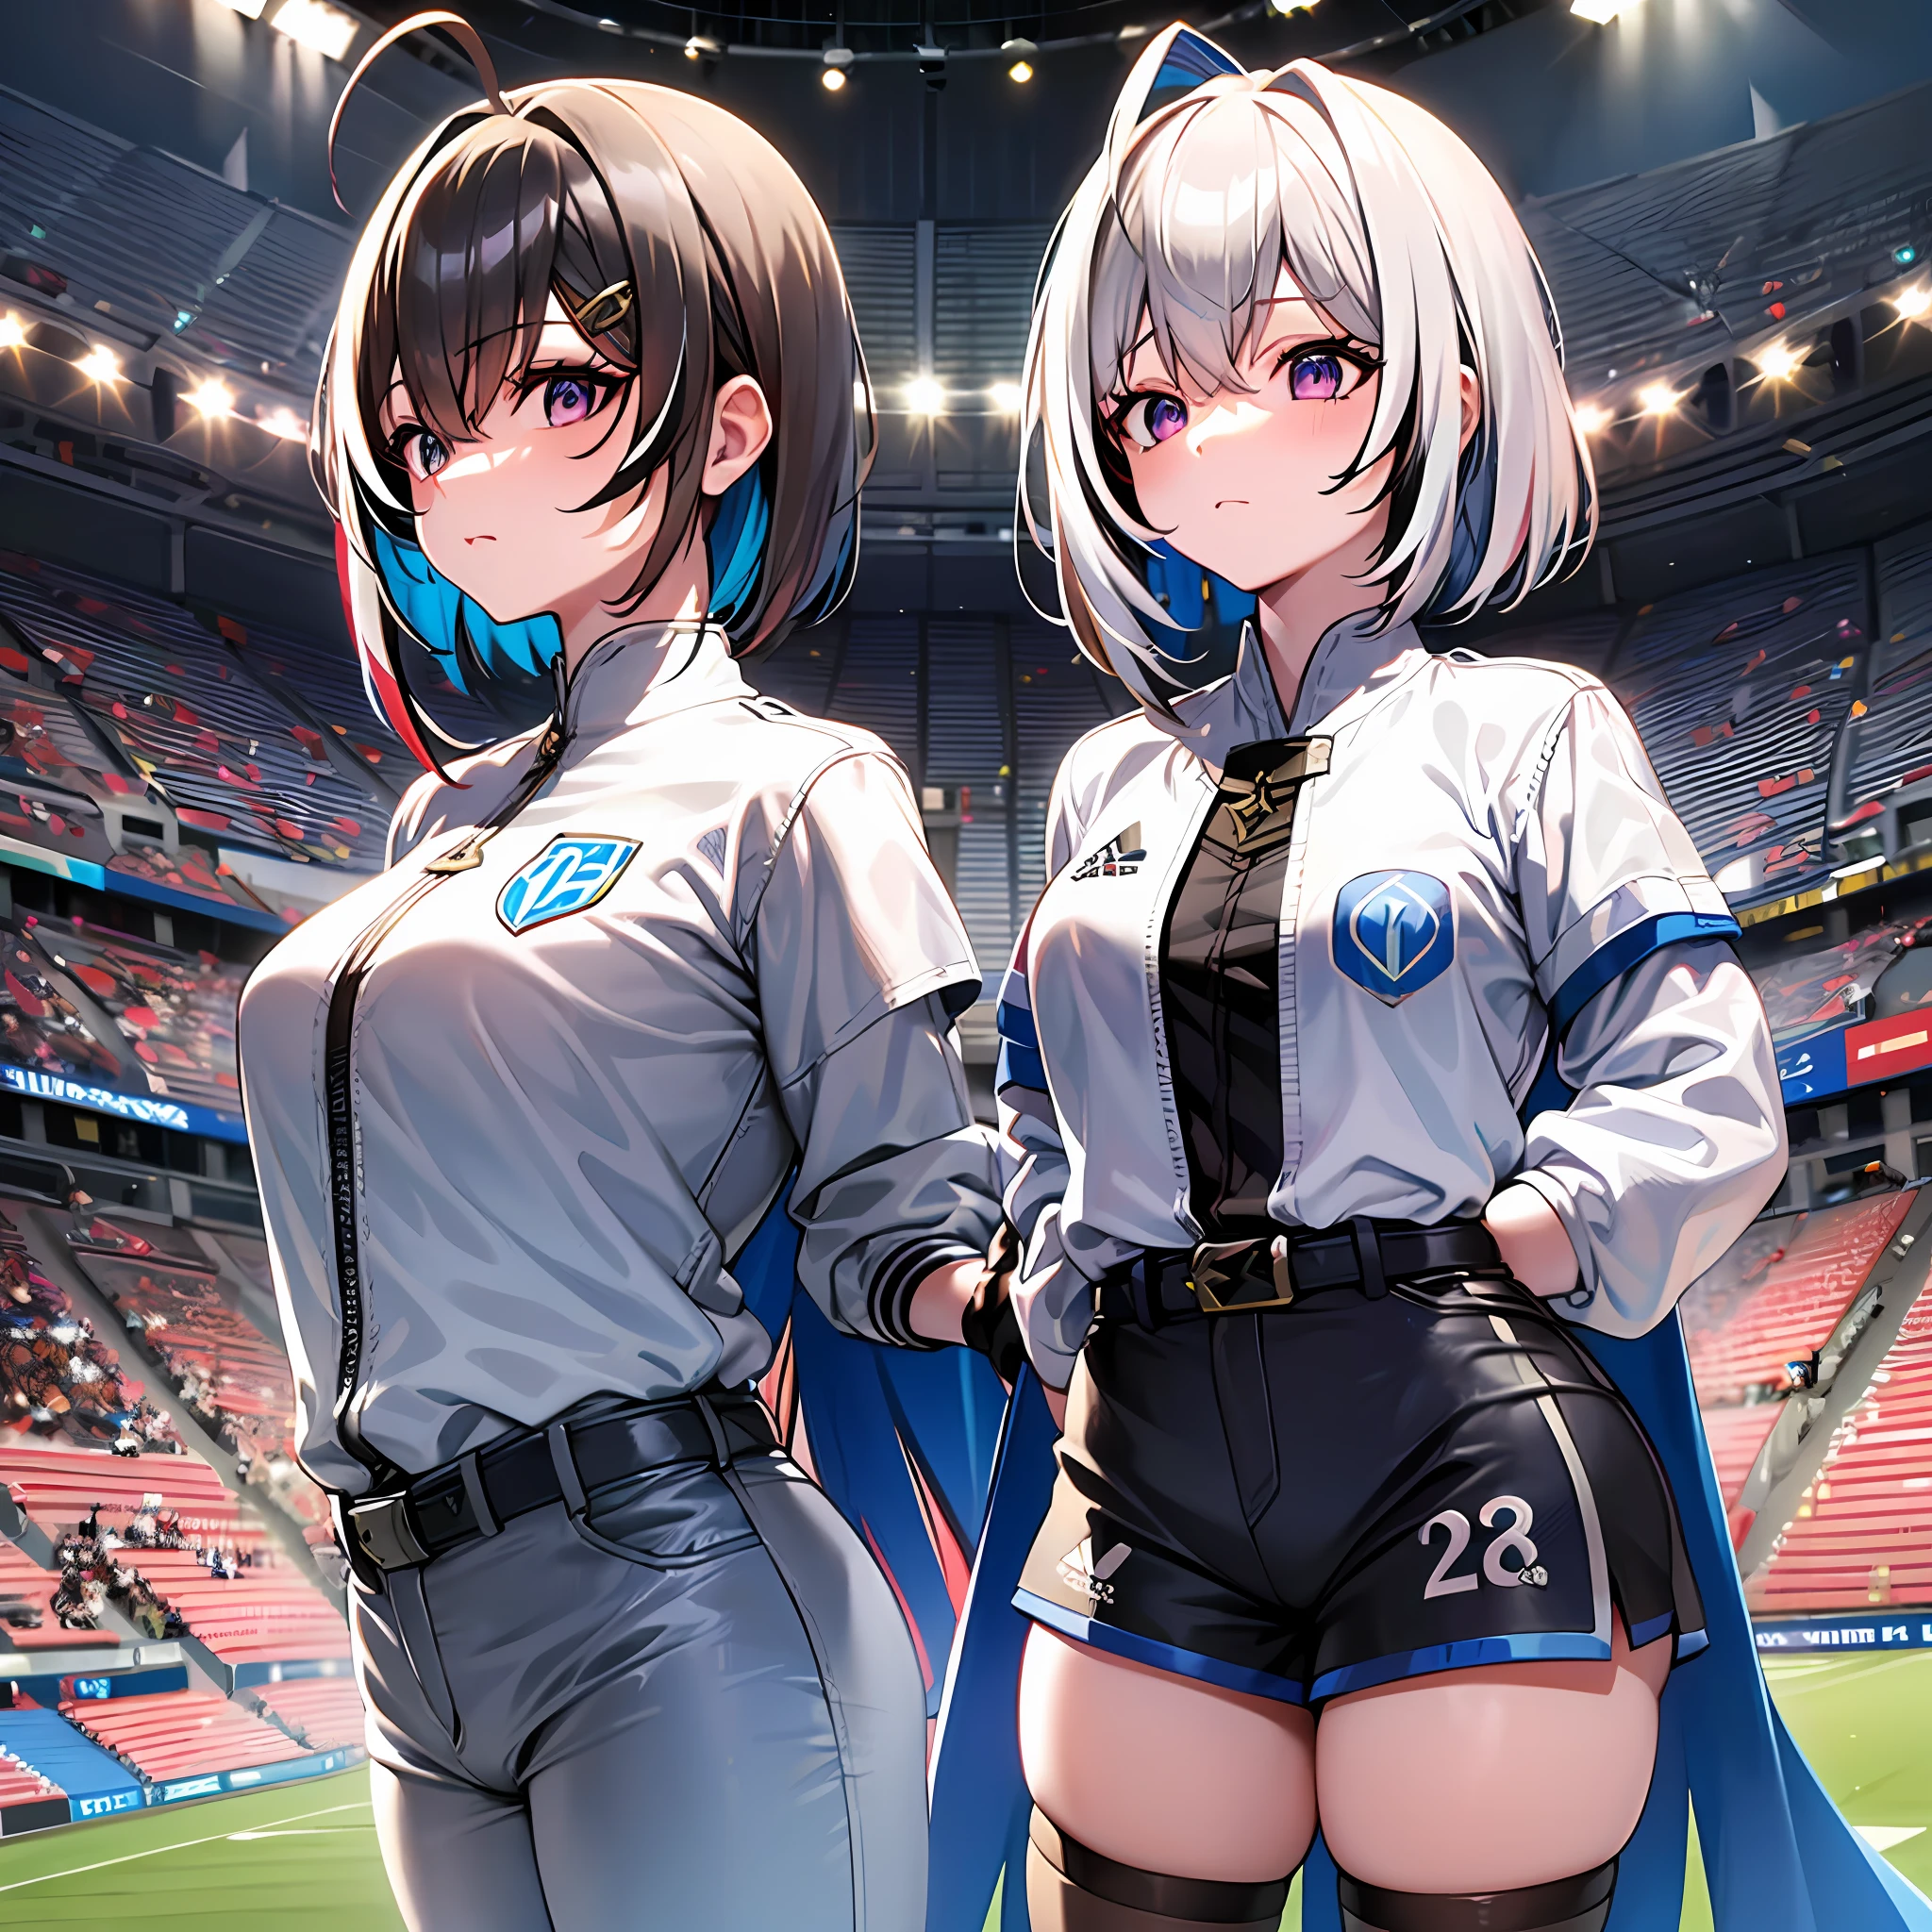 2d, masterpiece, best quality, anime, highly detailed face, highly detailed eyes, highly detailed background, perfect lighting, full body, 1 girl, nanashi mumei, wearing River Plate football club uniform, red vertical striped jersey and white shorts, white shorts and white socks,The shirt features equal-sized vertical stripes in red and white, alternating across the front and back, with the club crest located at the center of the chest.The shorts are white and the stockings are also white, without any additional detail or design), 2d, masterpiece, best quality, anime, highly detailed face, highly detailed eyes, highly detailed background, perfect lighting, full body, 1 girl, Amane Kanata , multicolored hair, asymmetrical hair, single hair, purple eyes, bracelet, short hair, blue hair, gray hair, socks, long sleeves, gray jacket, bob cut, long hair, bangs, ruffles, wide sleeves, white wings, with The football club uniform (SSC Napoli, a dark blue shirt, white shorts and blue socks, The shirt presents a simple design made in dark blue, with the club's crest located in the center of the chest. The shorts are white and the socks are blue, with a white detail on top), both in the center of the stadium (Mâs Monumental Stadium), looking at each other, with a serious and murderous expression. gaze, as she respectfully shakes hands, full distance view, 4k, 8k, hyper realistic, ultra detailed, illustration, high contrast